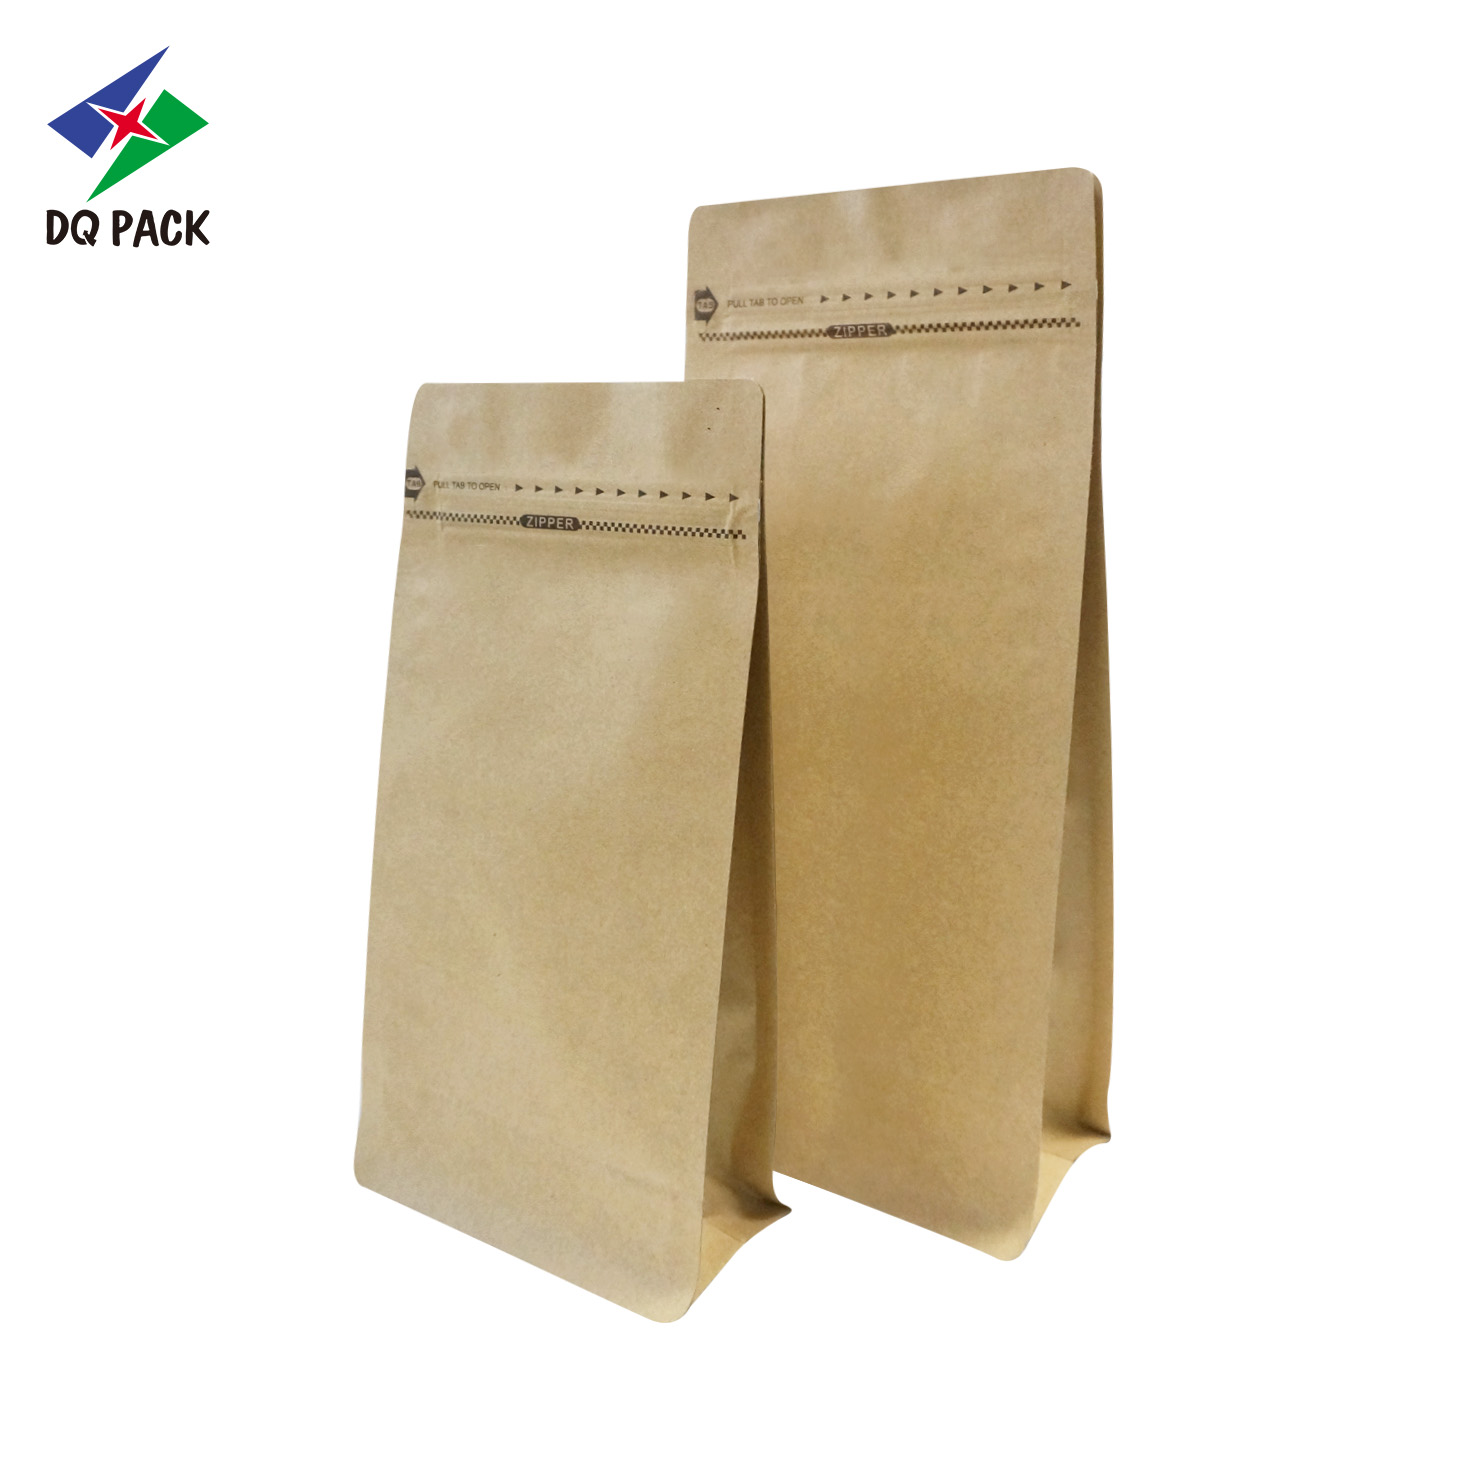 DQ PACK Custom Printed Wholesale Kraft Paper Bag Stand Up Pouch With Zipper